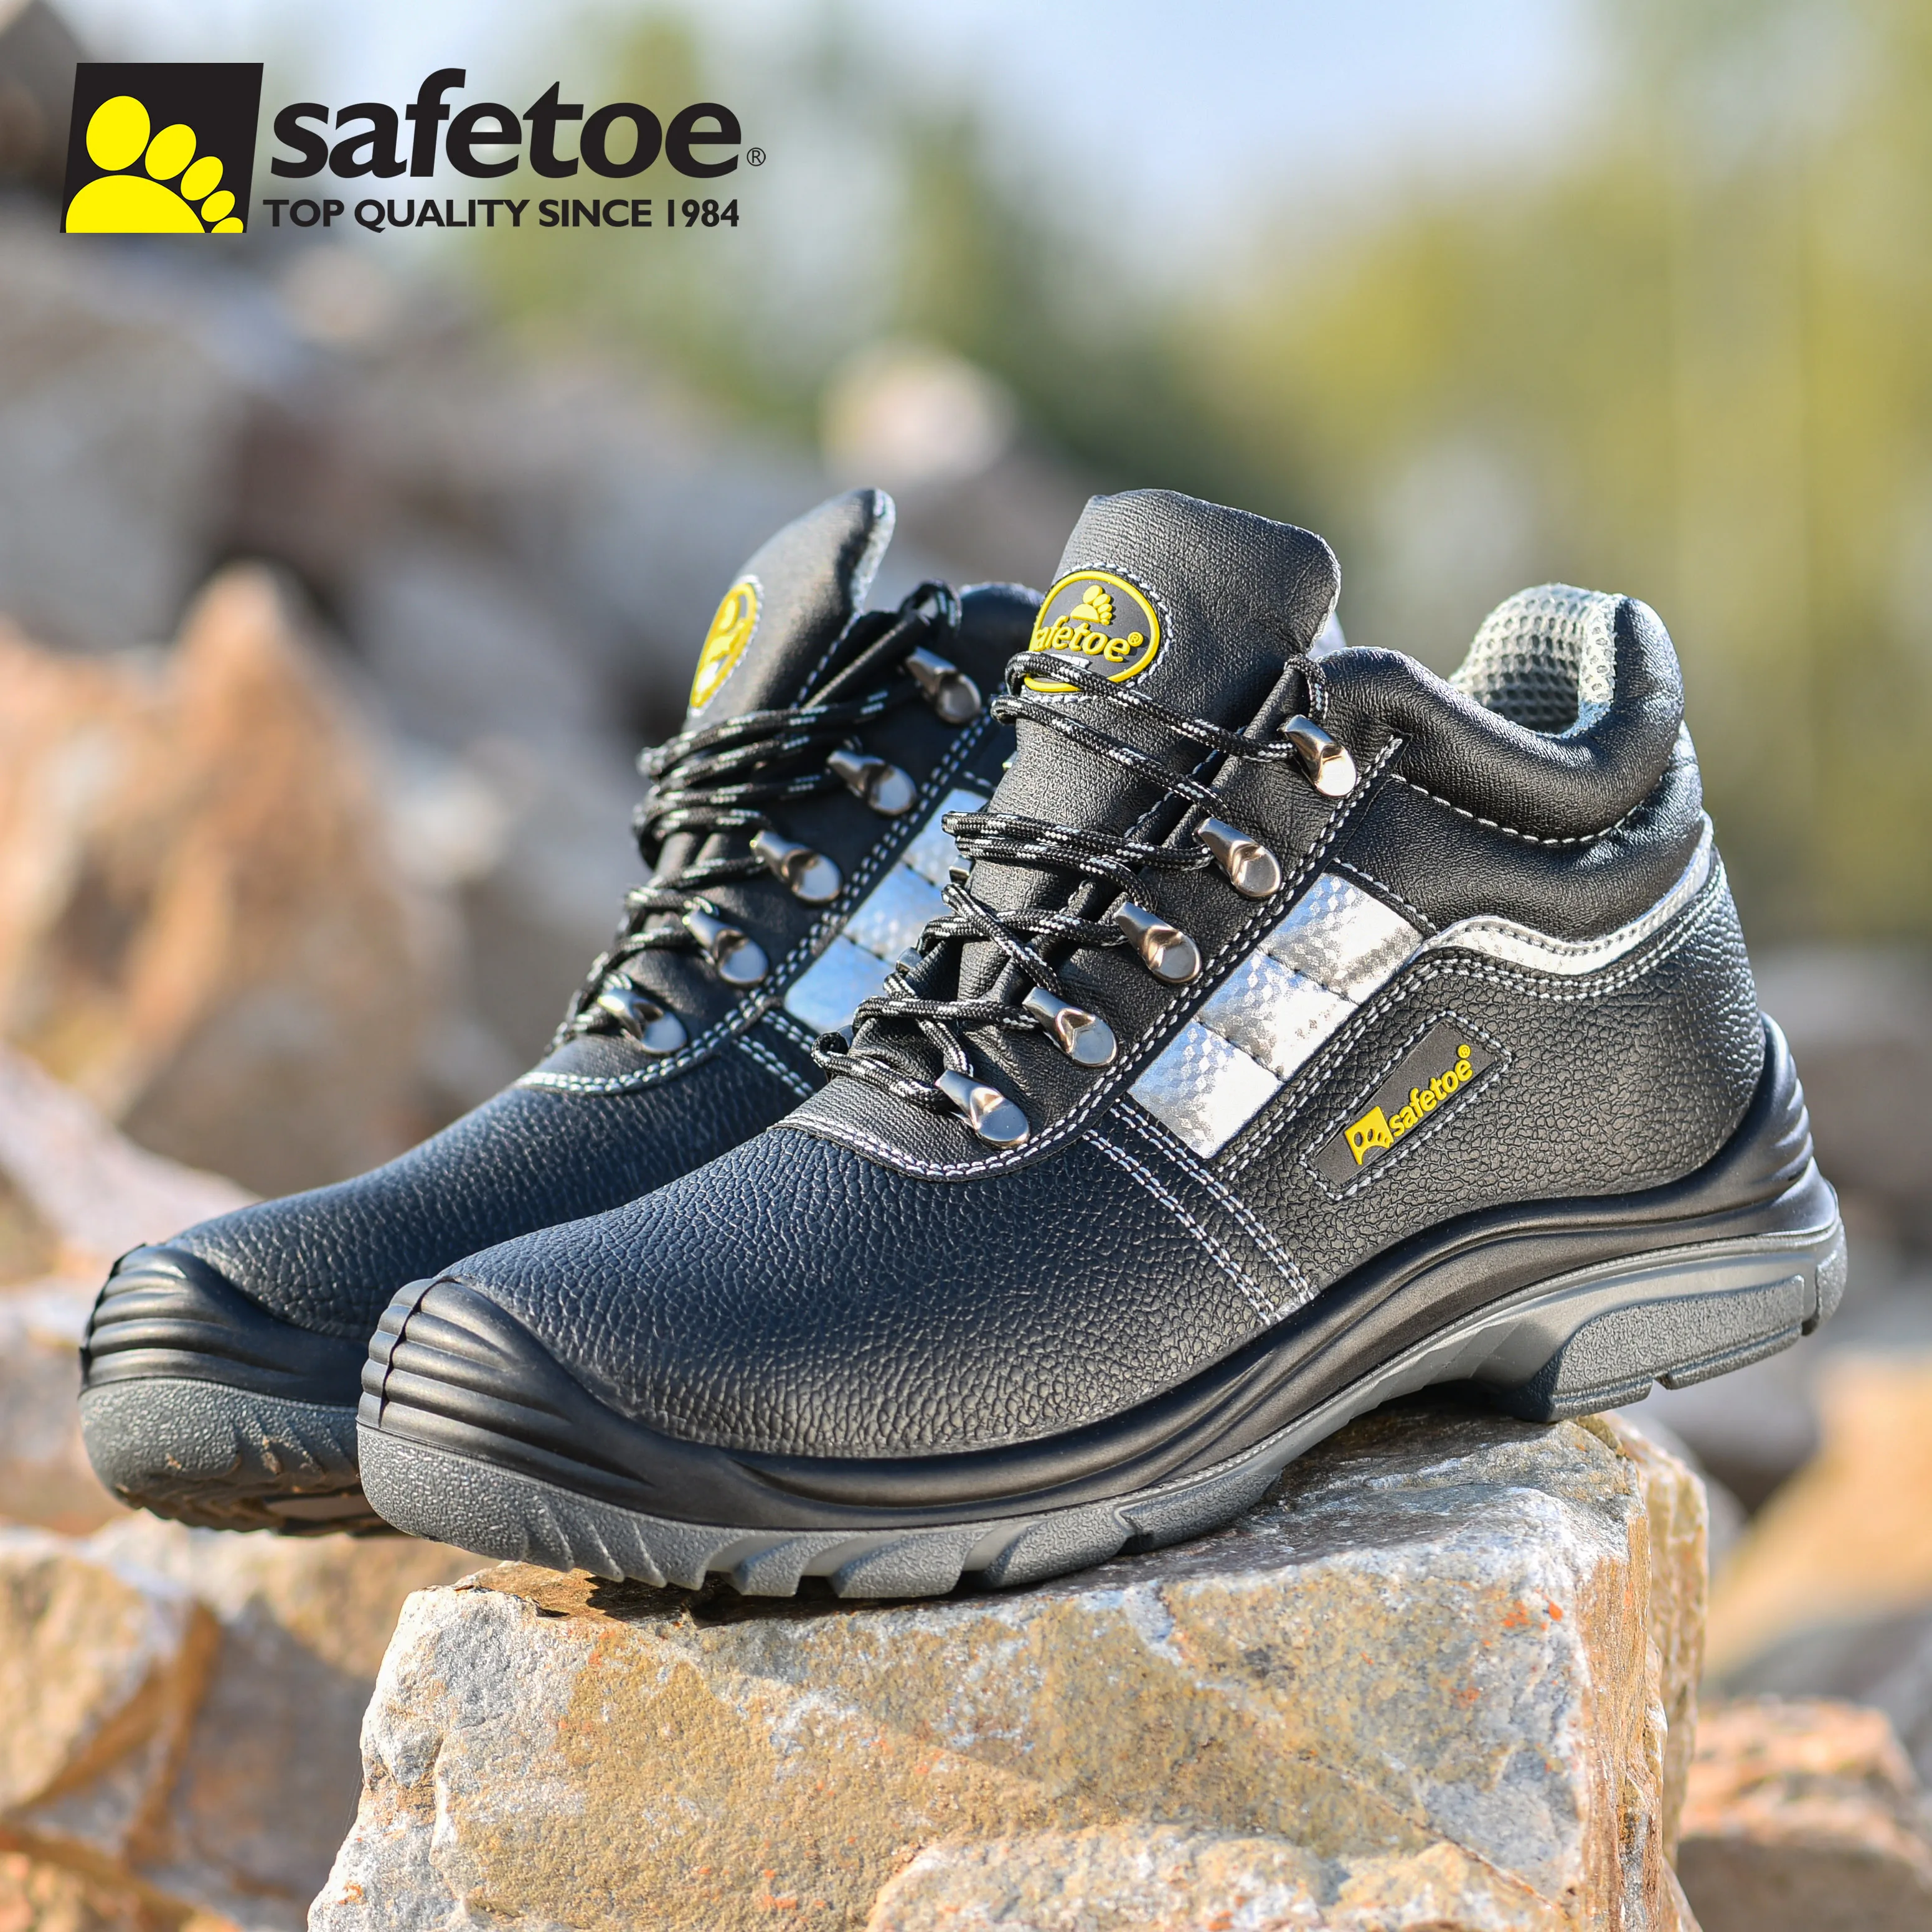 S3 Steel Toe Cap Safety Shoes Protective Work Boots Hiking Indestructible Mens 